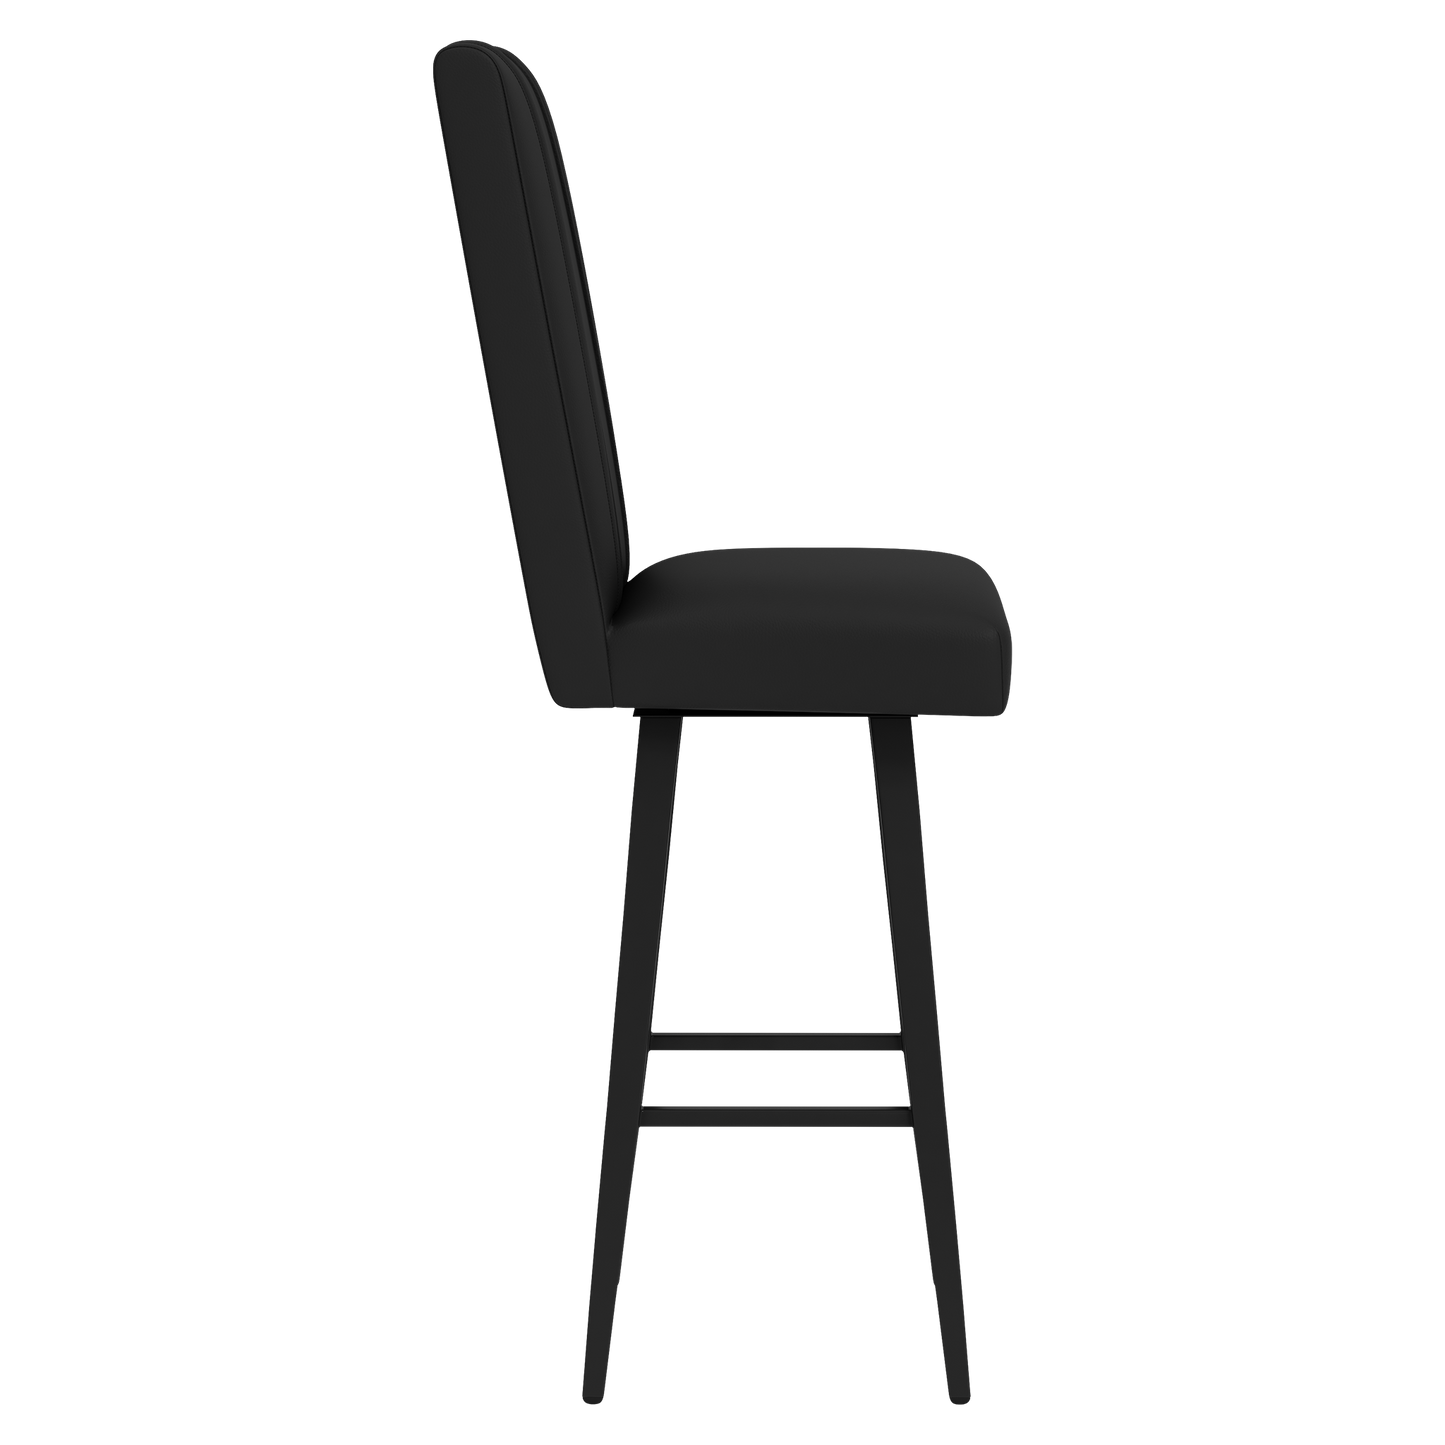 Swivel Bar Stool 2000 with Los Angeles Clippers Secondary